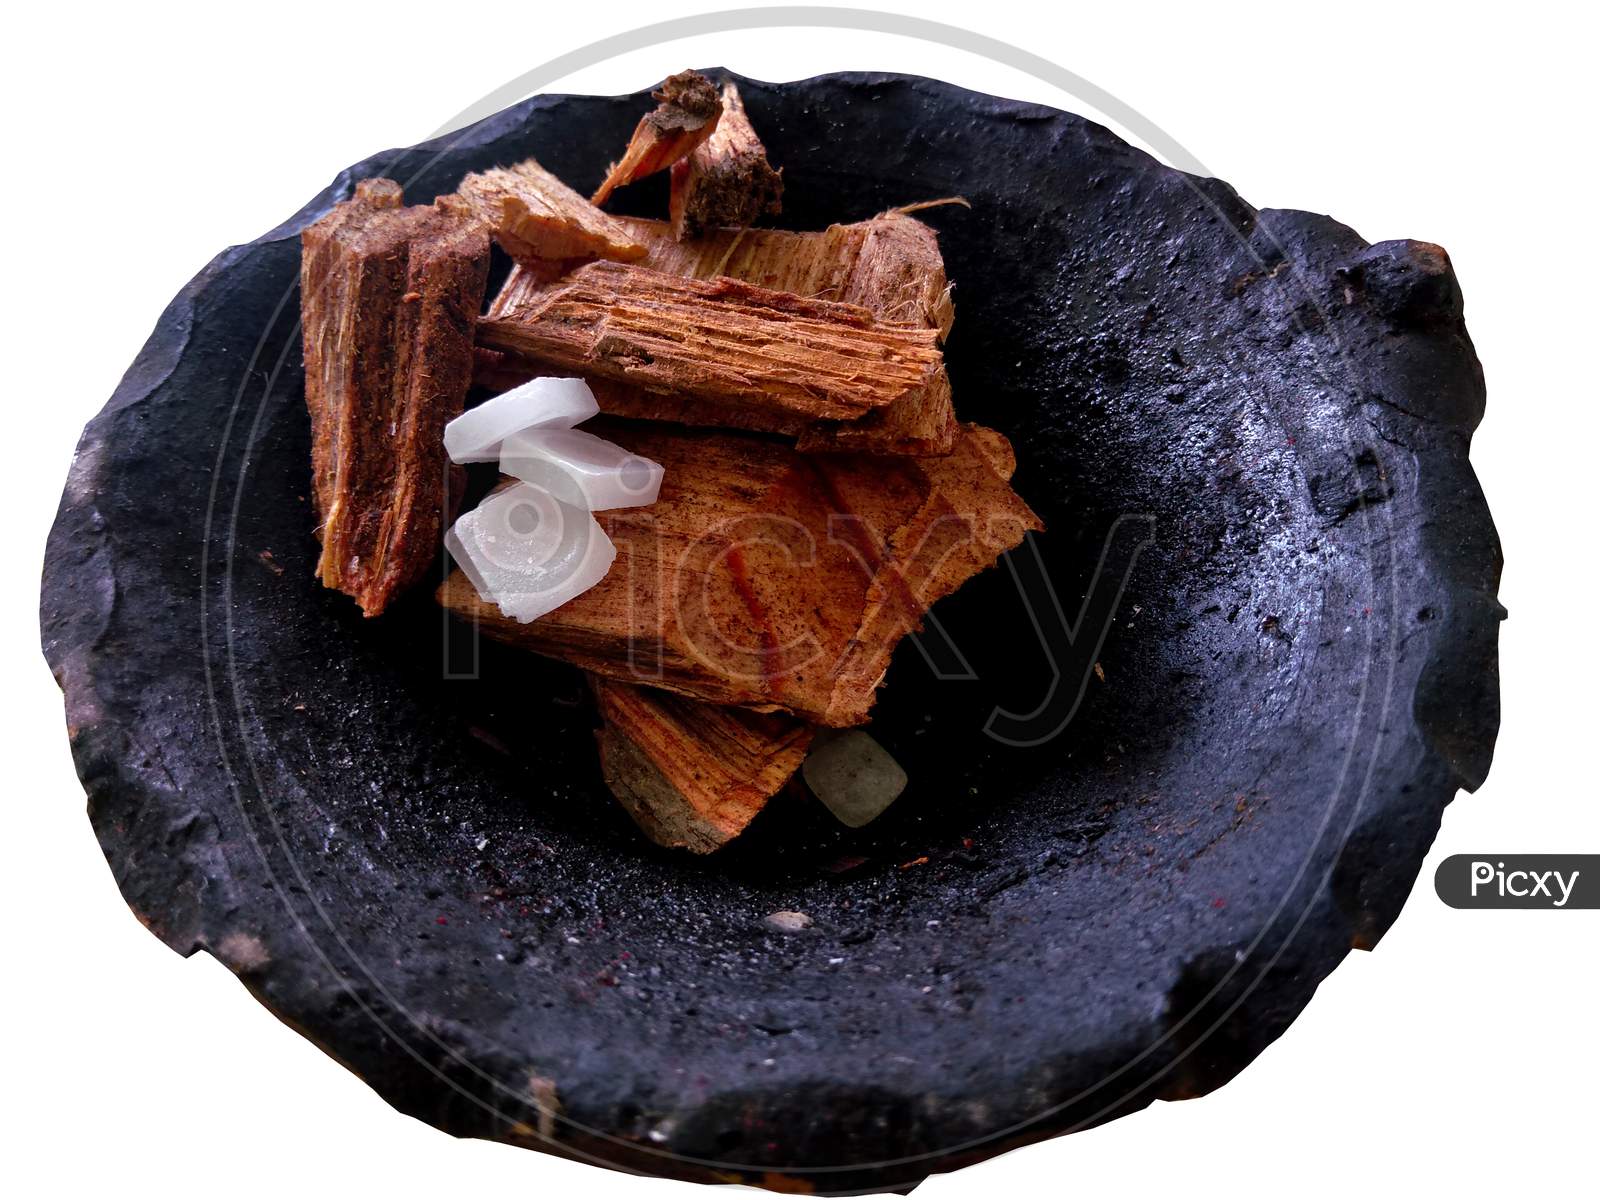 Small pieces of wood and Camphor Tablets (known as Karpoor or karpur in Hindi) used for producing fire during the worship of God in Hindu kept in a clay pot.